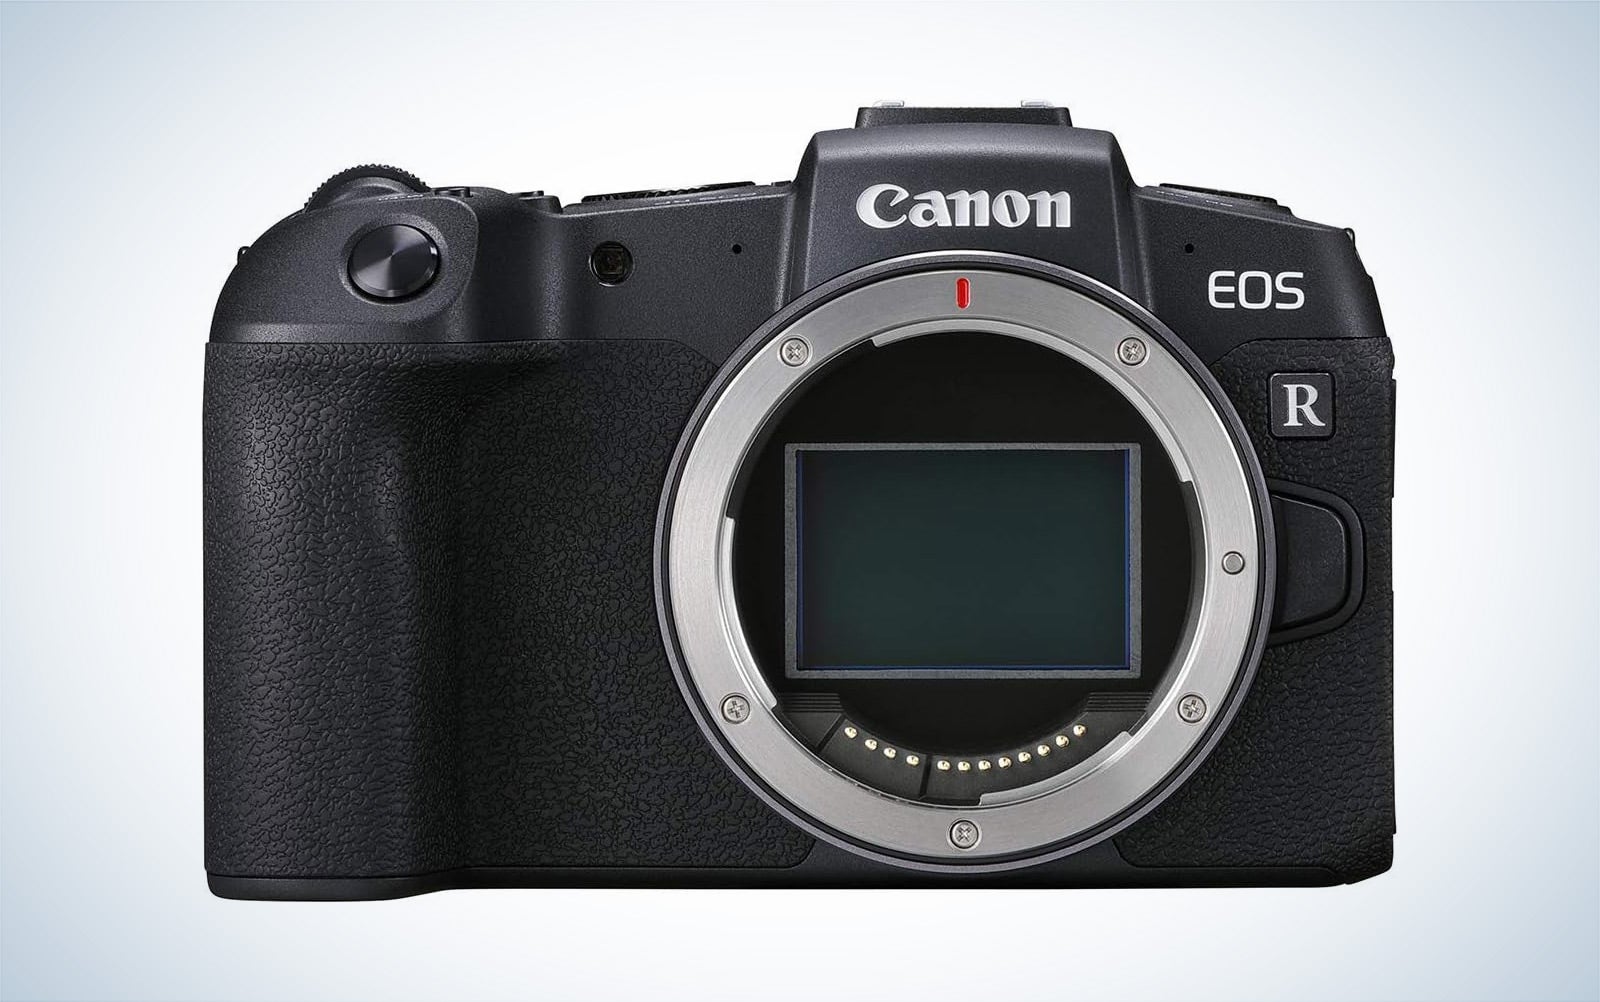 The Canon EOS RP full-frame mirrorless camera against a white background with a gray gradient.